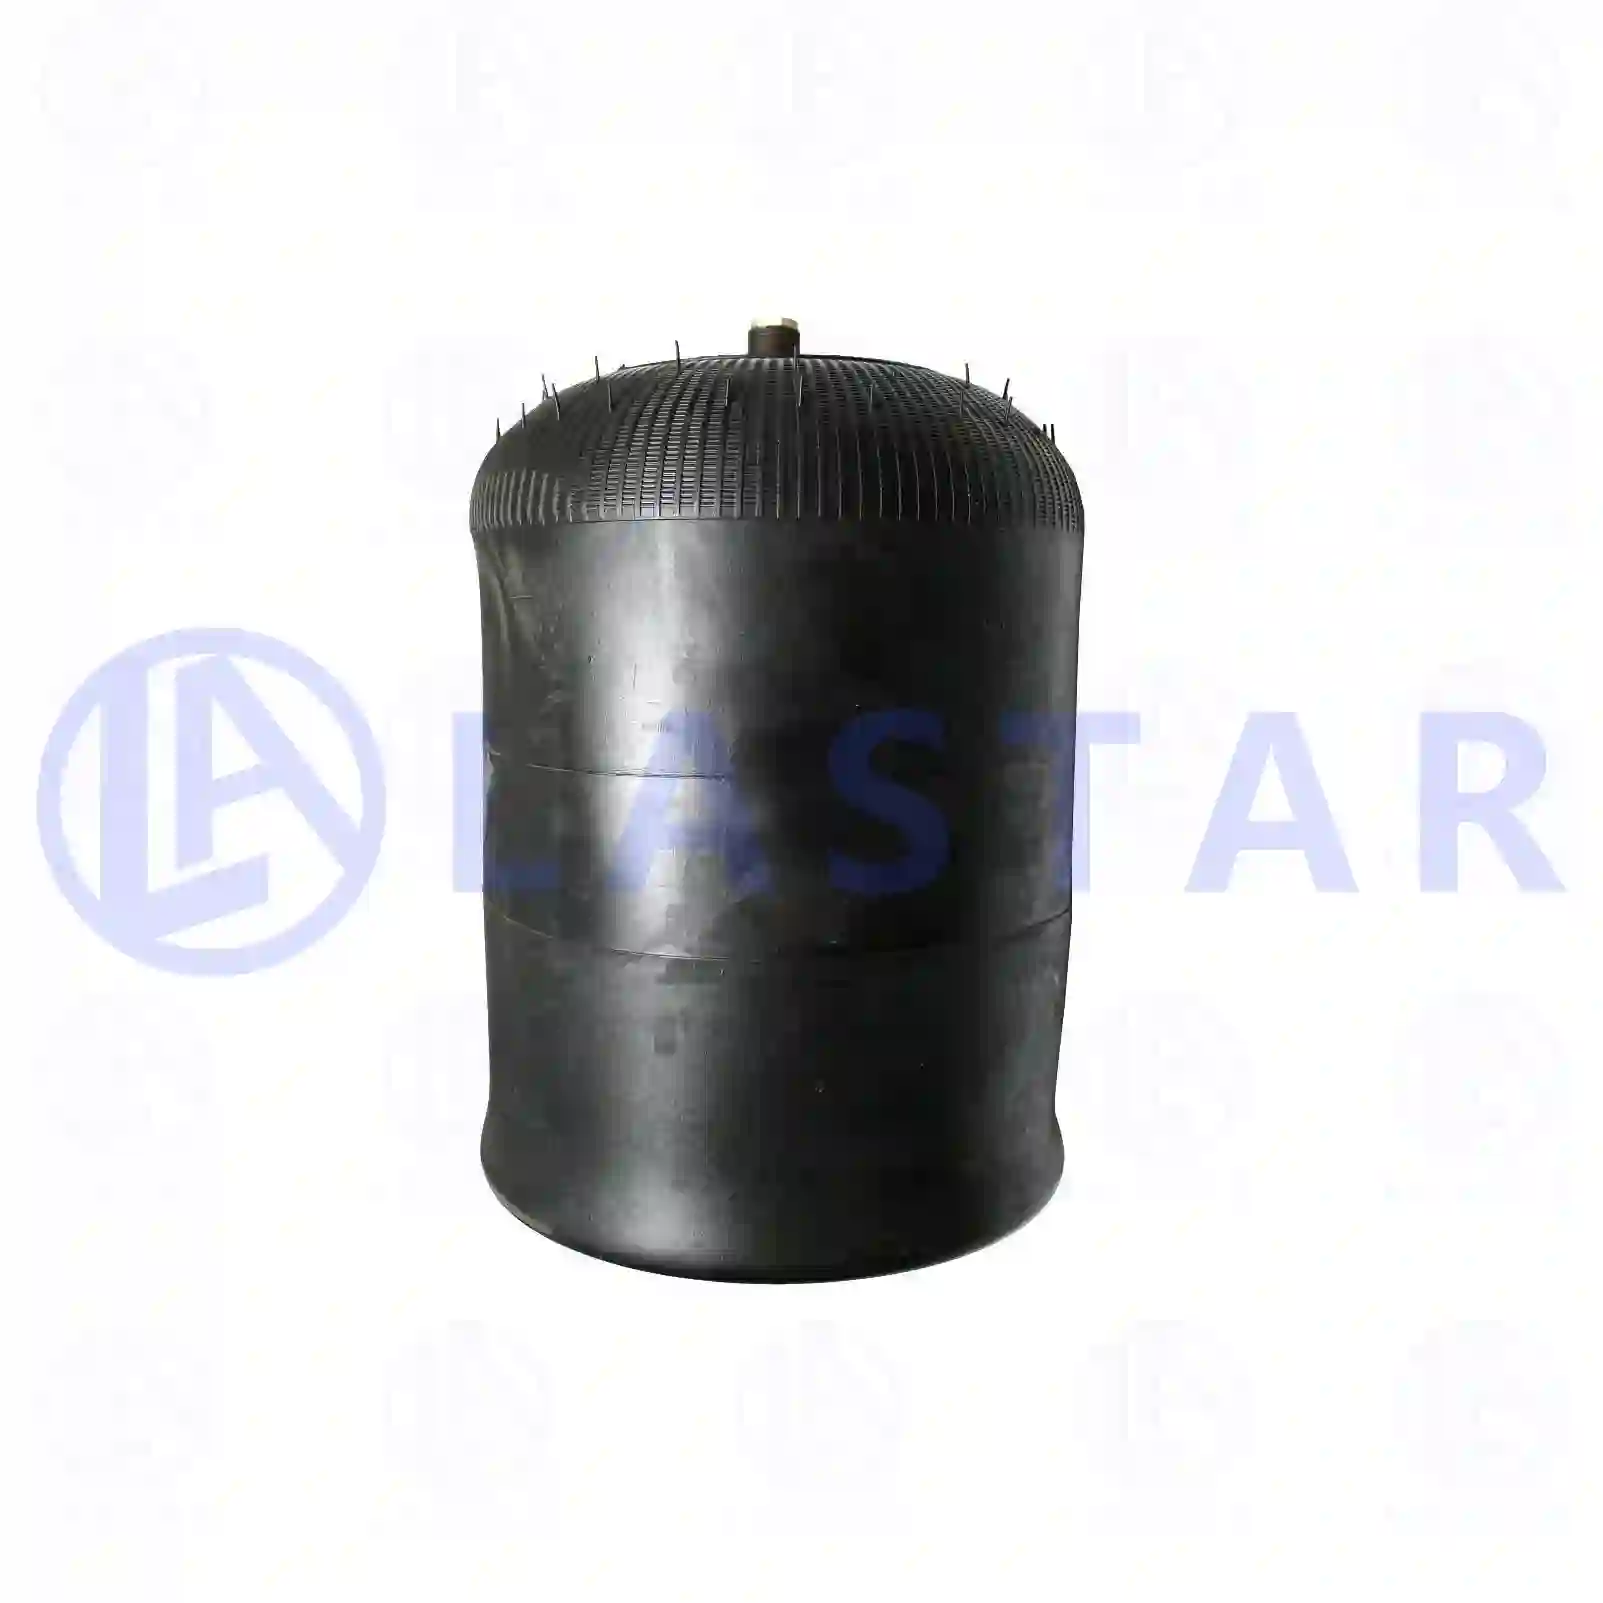 Air spring, with steel piston, 77728168, 9463200121, , , ||  77728168 Lastar Spare Part | Truck Spare Parts, Auotomotive Spare Parts Air spring, with steel piston, 77728168, 9463200121, , , ||  77728168 Lastar Spare Part | Truck Spare Parts, Auotomotive Spare Parts